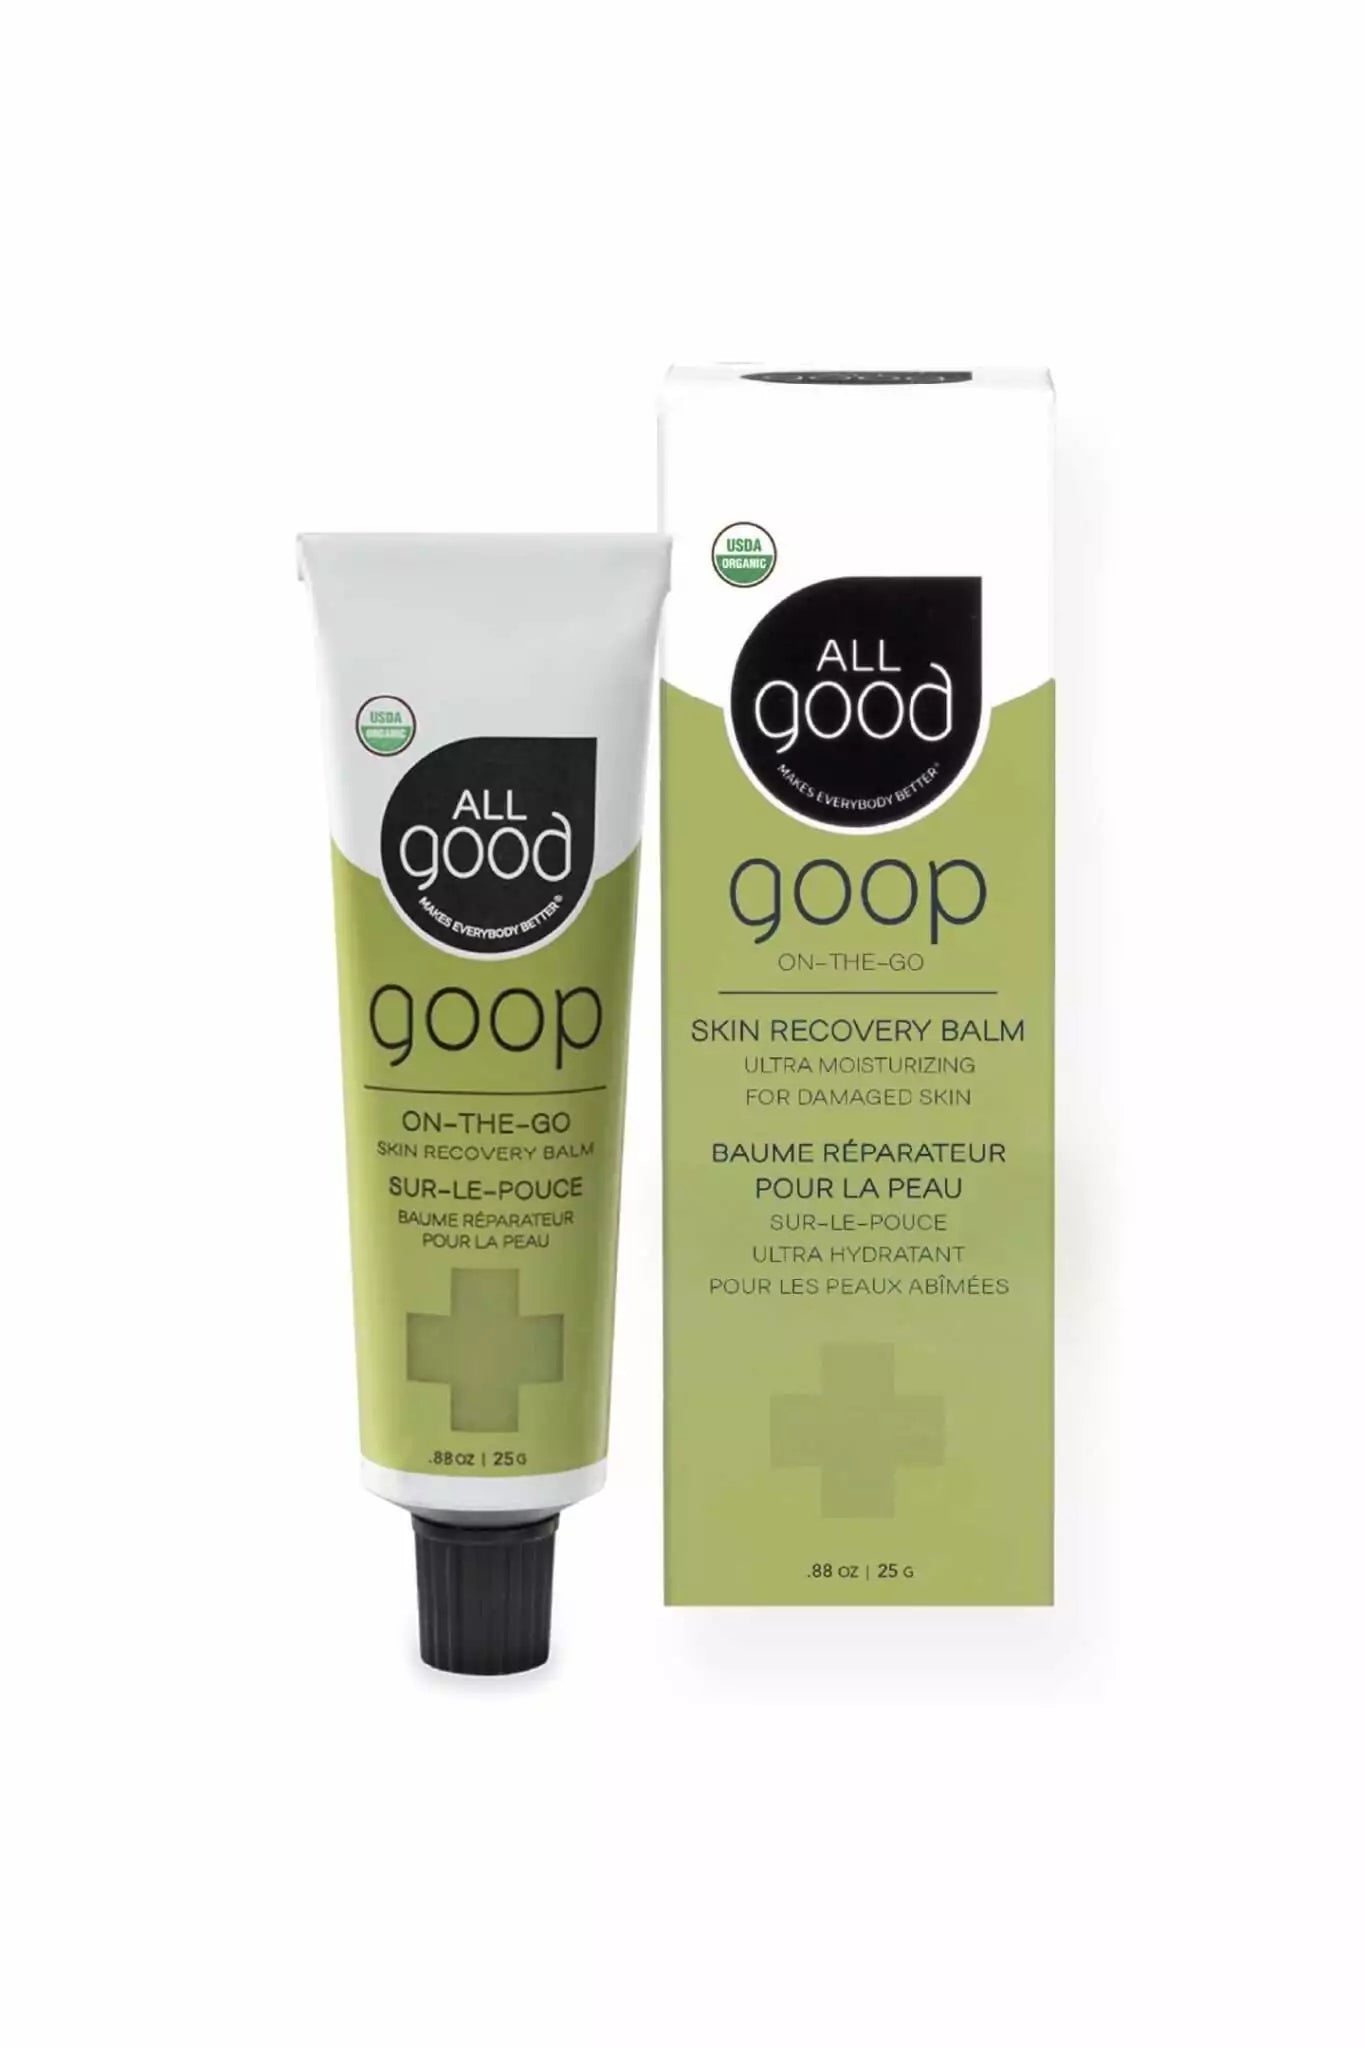 All Good GOOP on the Go Skin Recovery Balm 25g